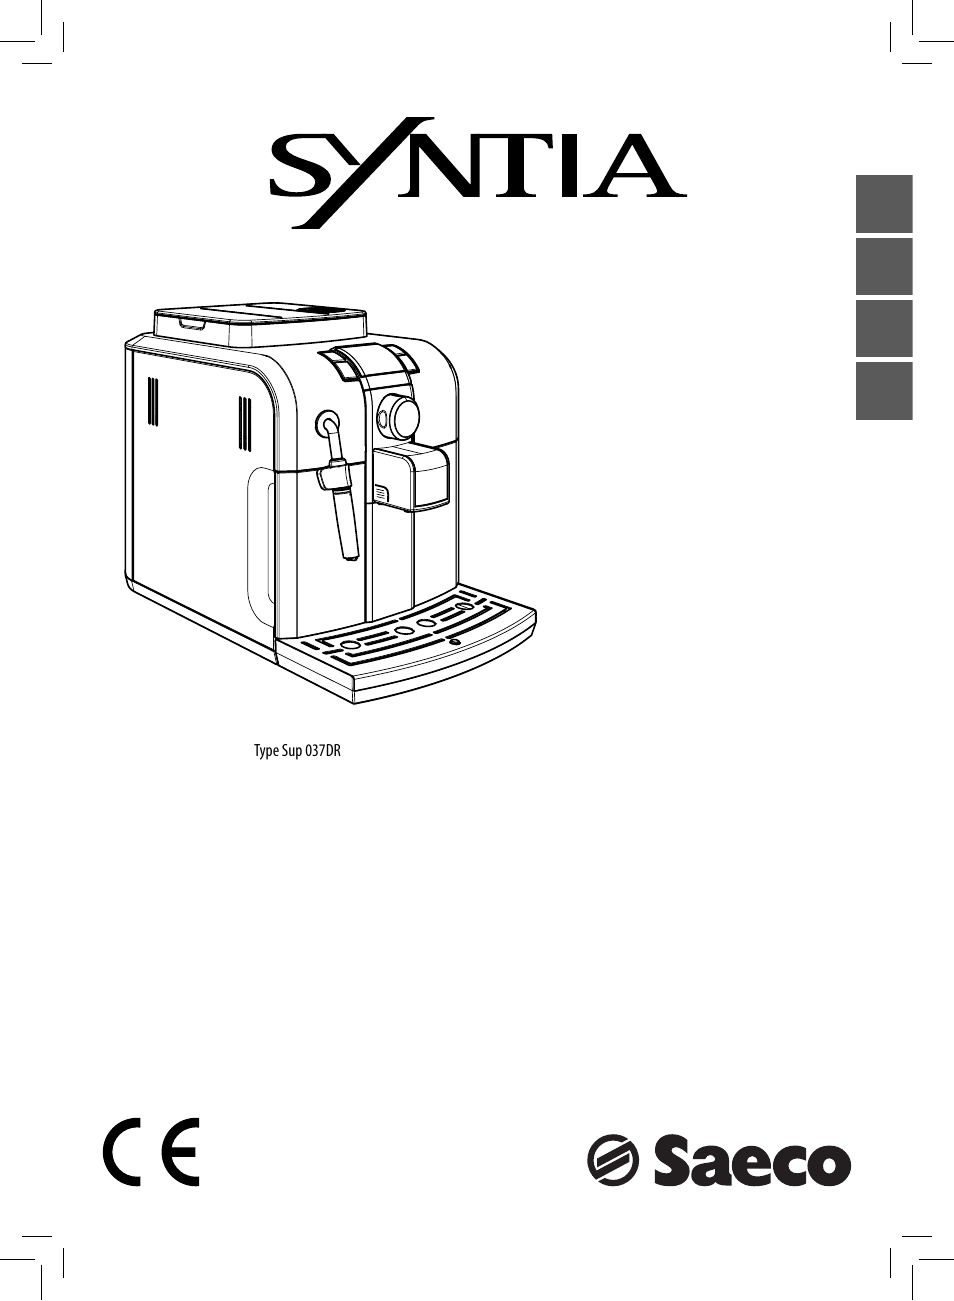 Philips Saeco Syntia Kaffeevollautomat User Manual | 96 pages | Also for:  RI9837-05, Saeco RI9837-01